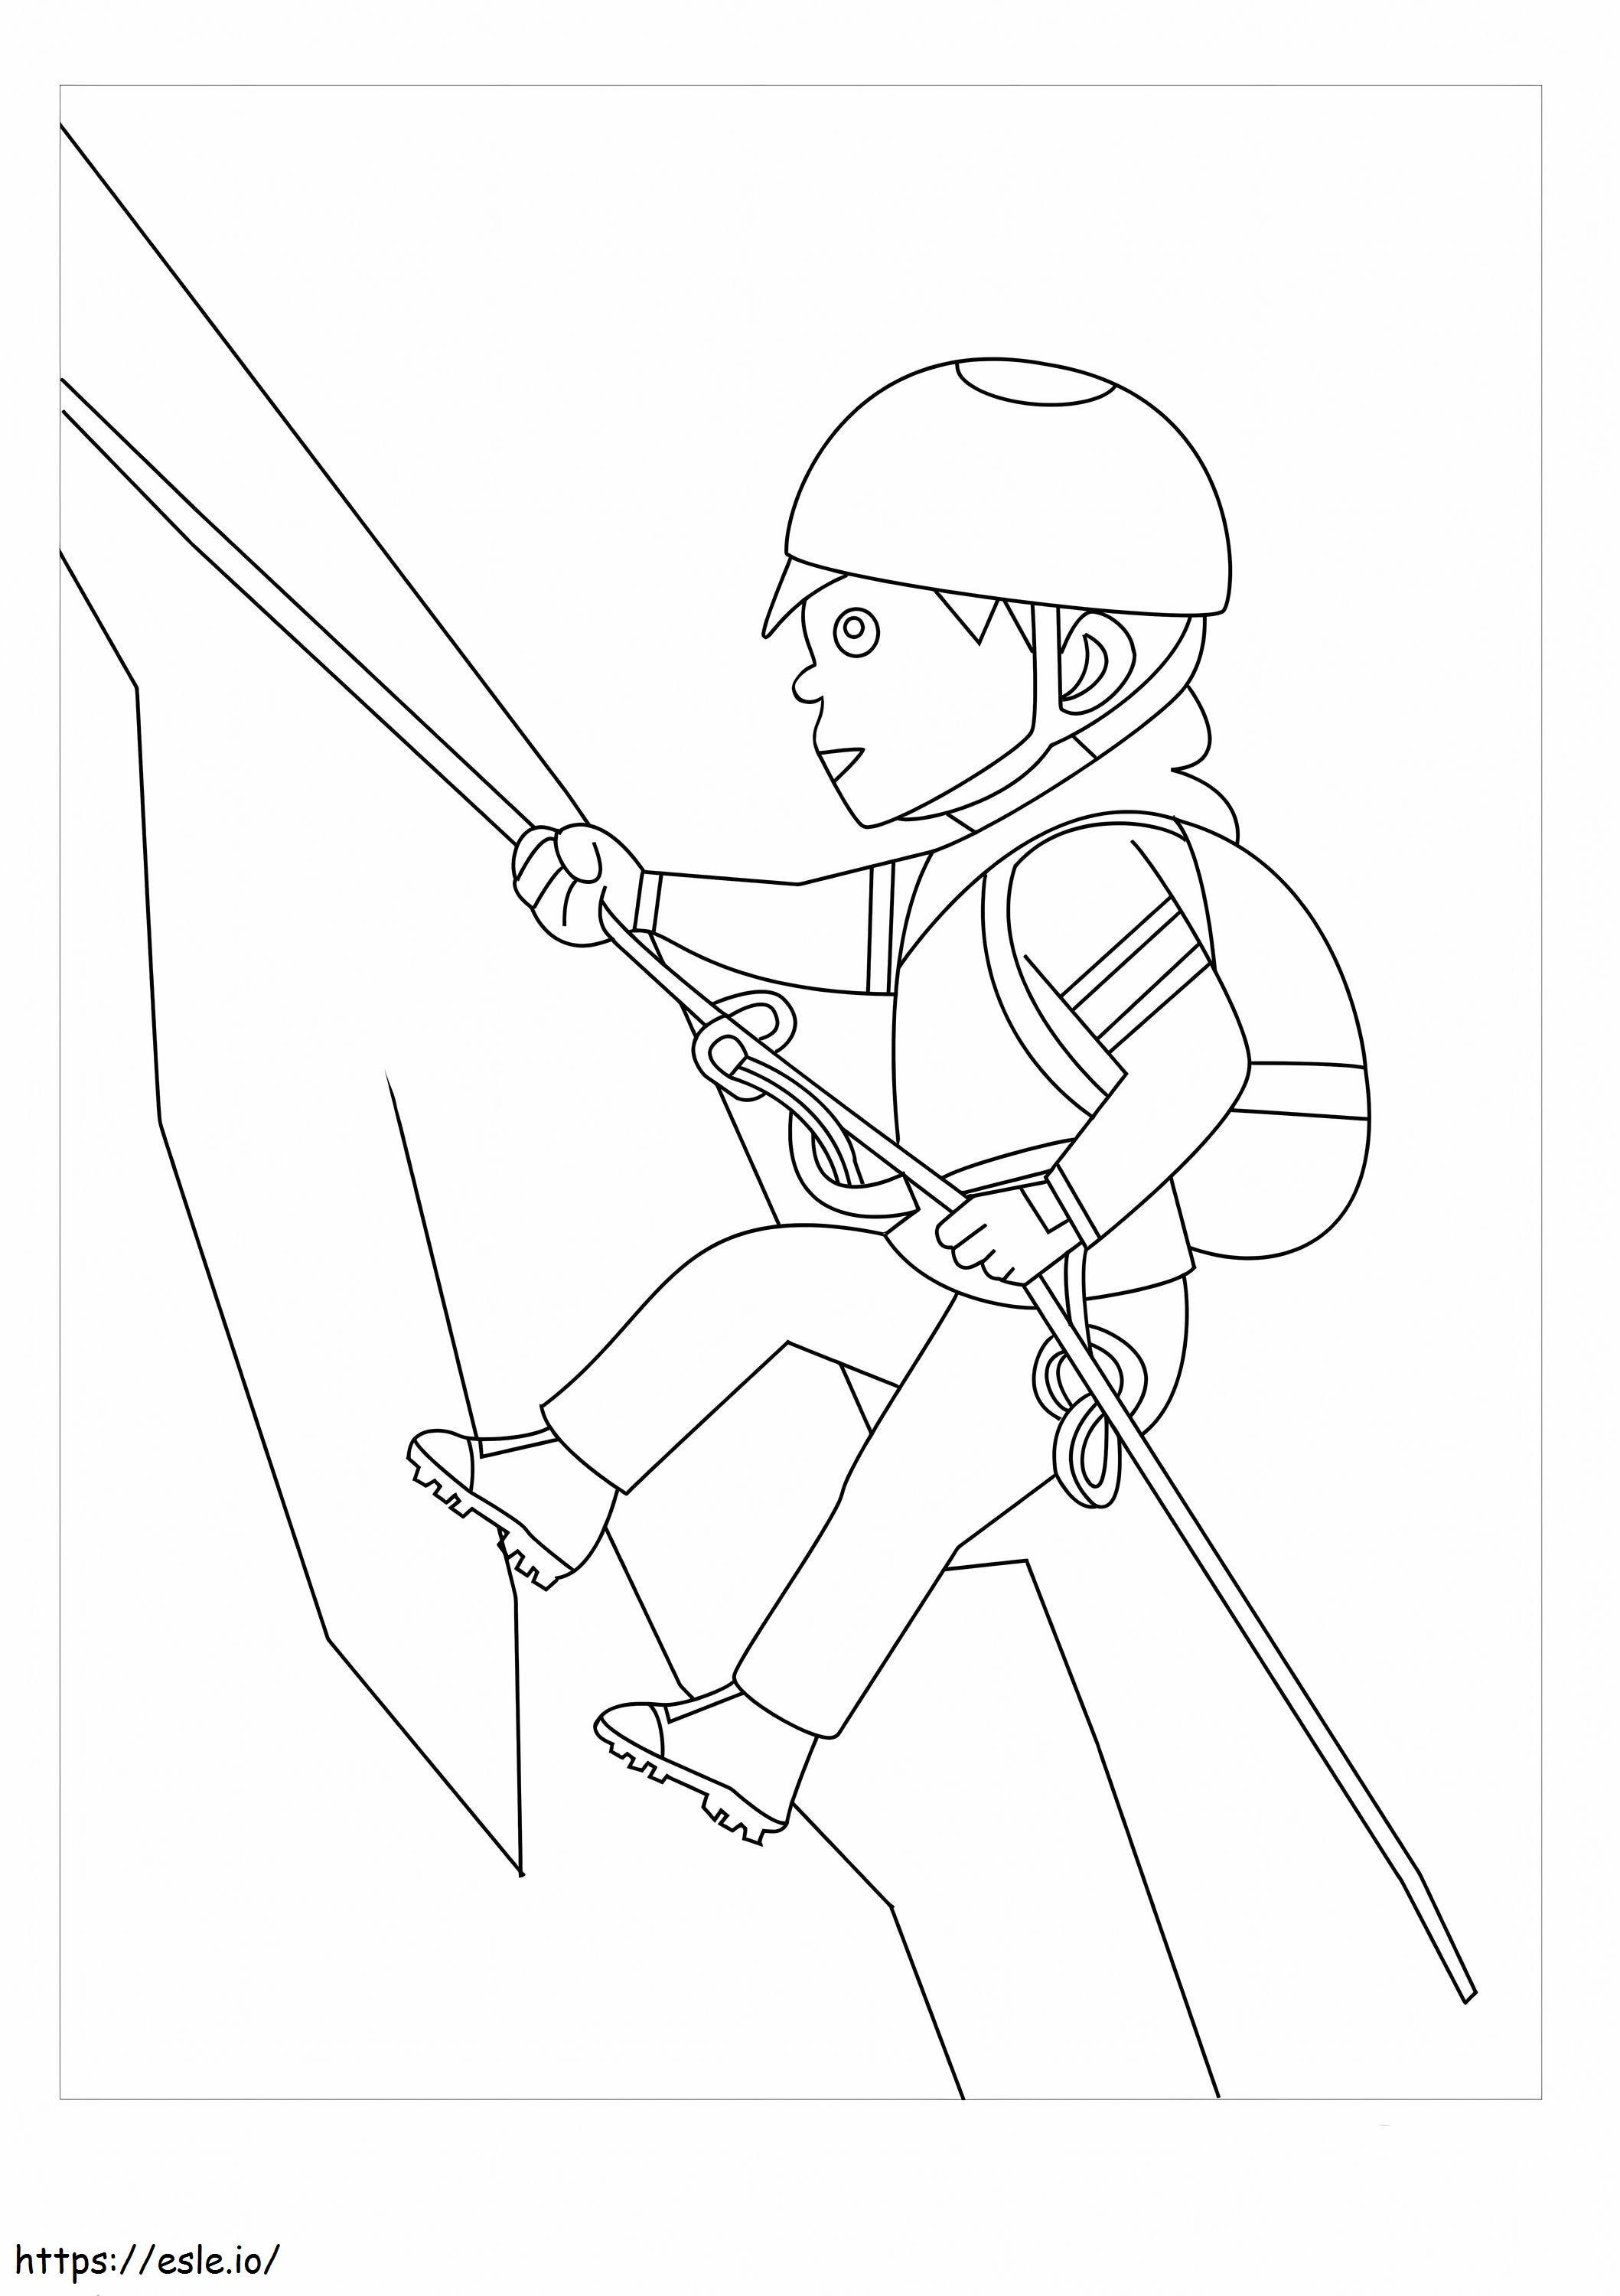 Man Climbing Rope coloring page